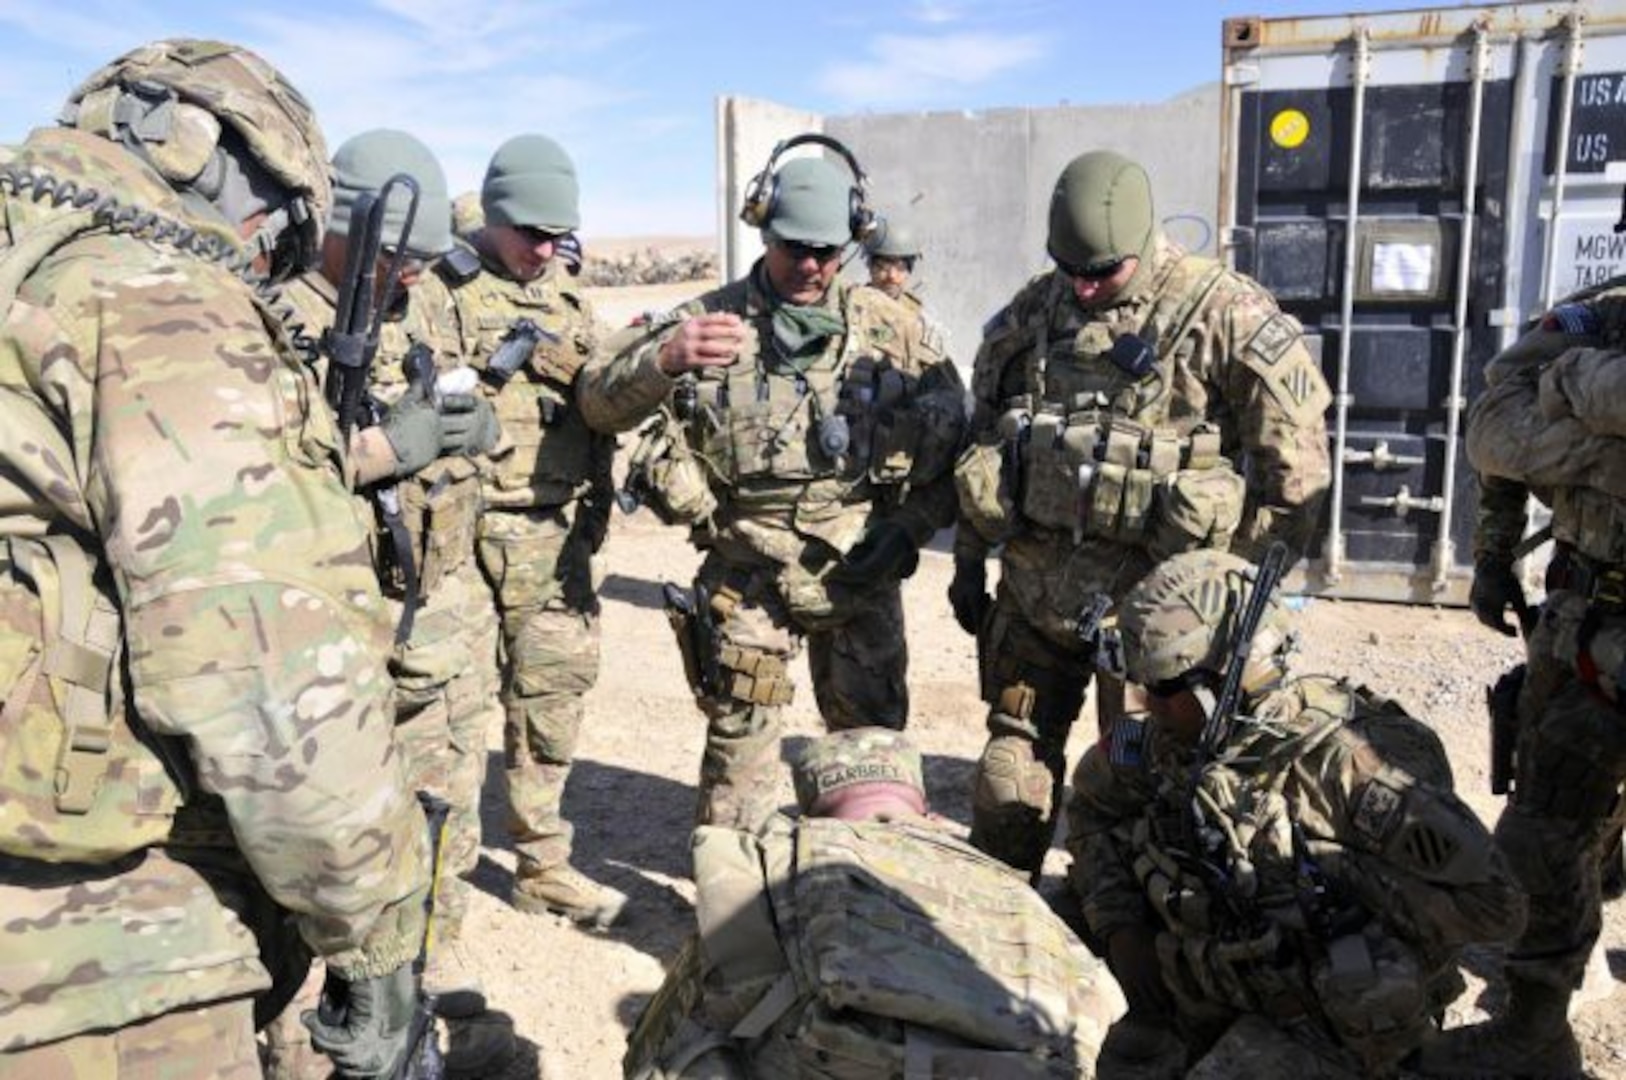 Hawaii Army National Guard Maj. Kevin Carbrey, commander of Security Forces Assistance Team 21, gives a mission brief before leaving Forward Operating Base Lagman, Afghanistan, on Jan. 14, 2013.